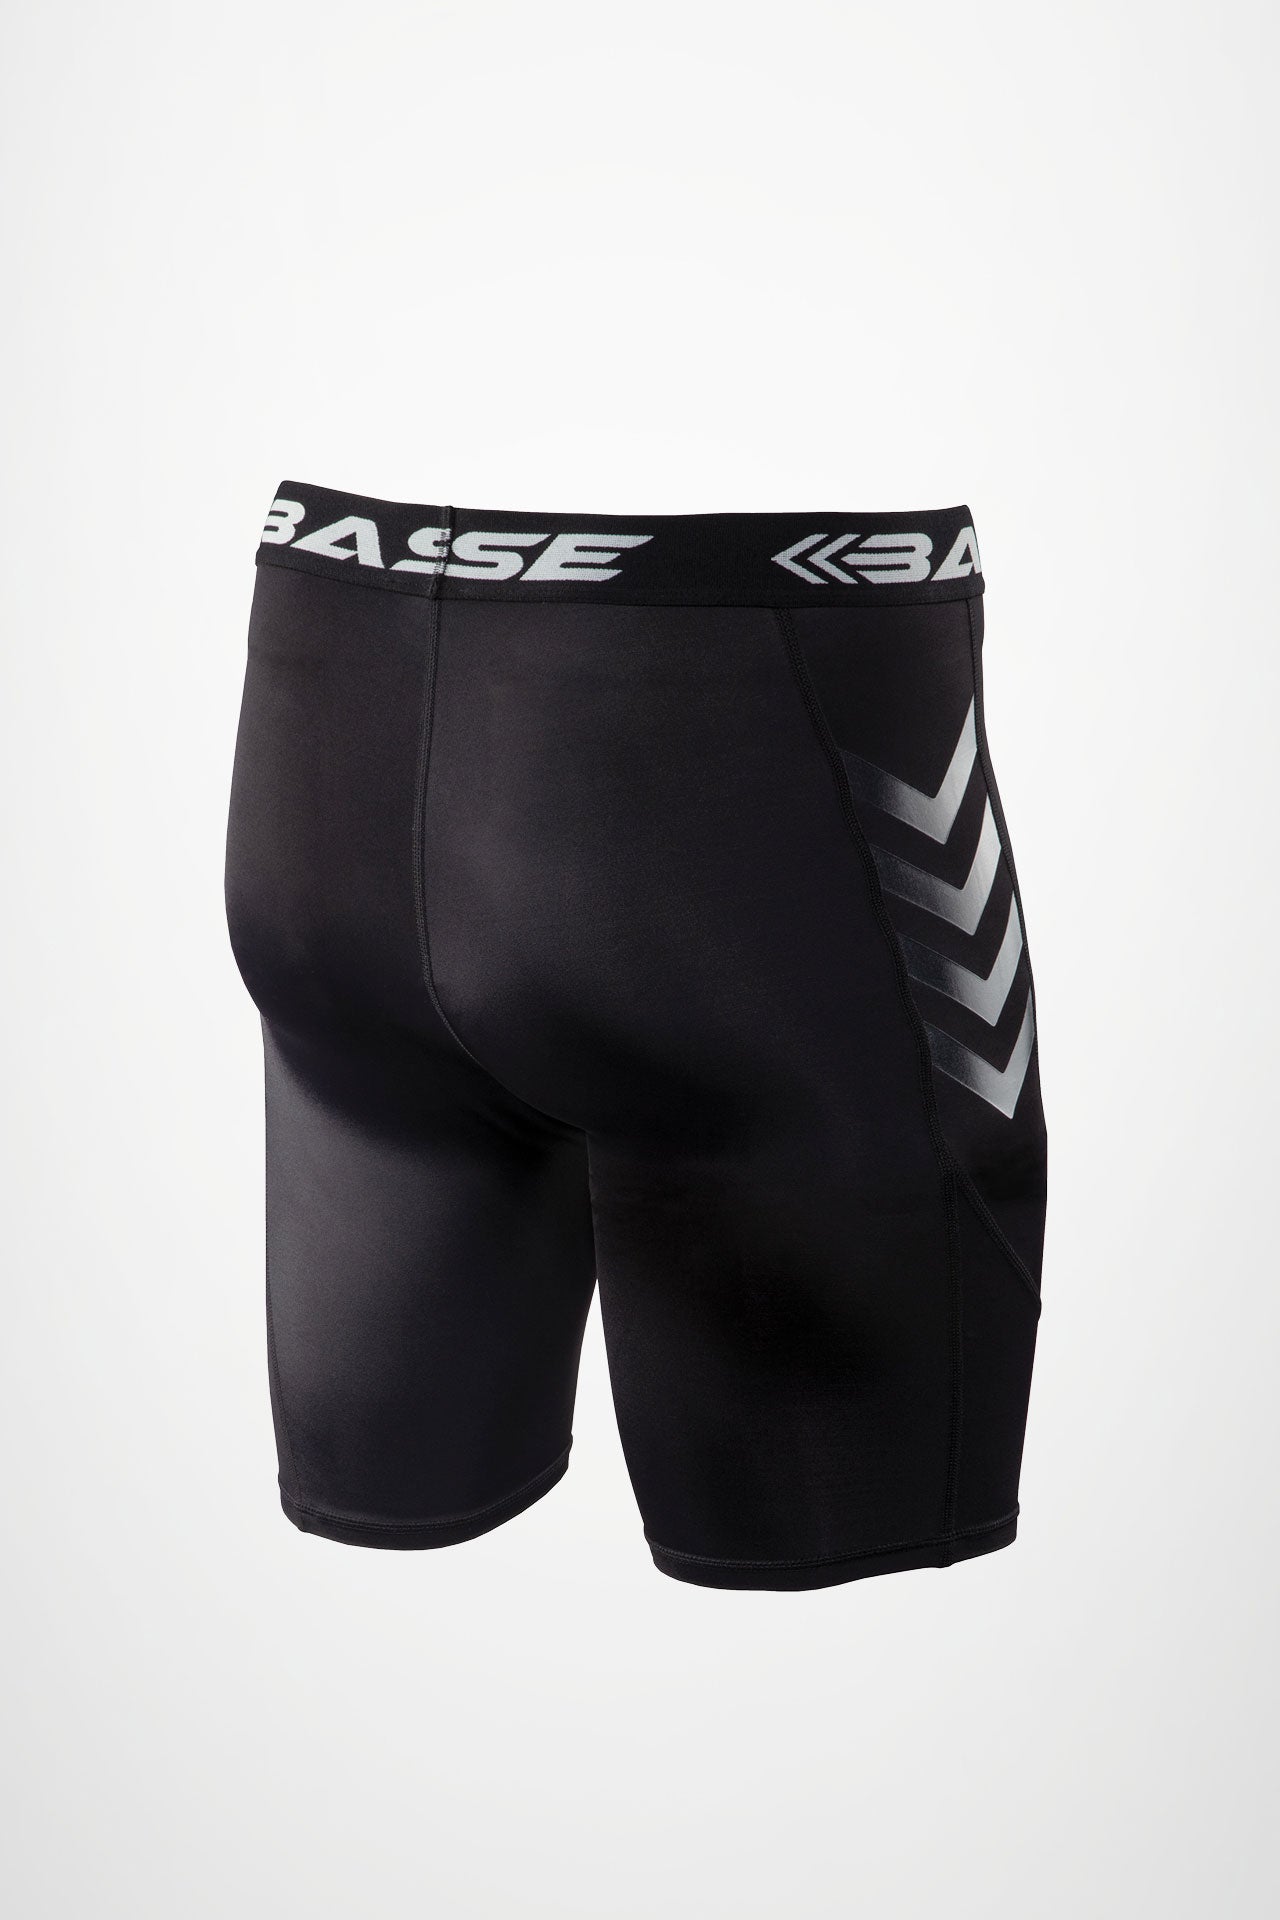 North Moore Short in Black  Compression shorts, Moisture wicking